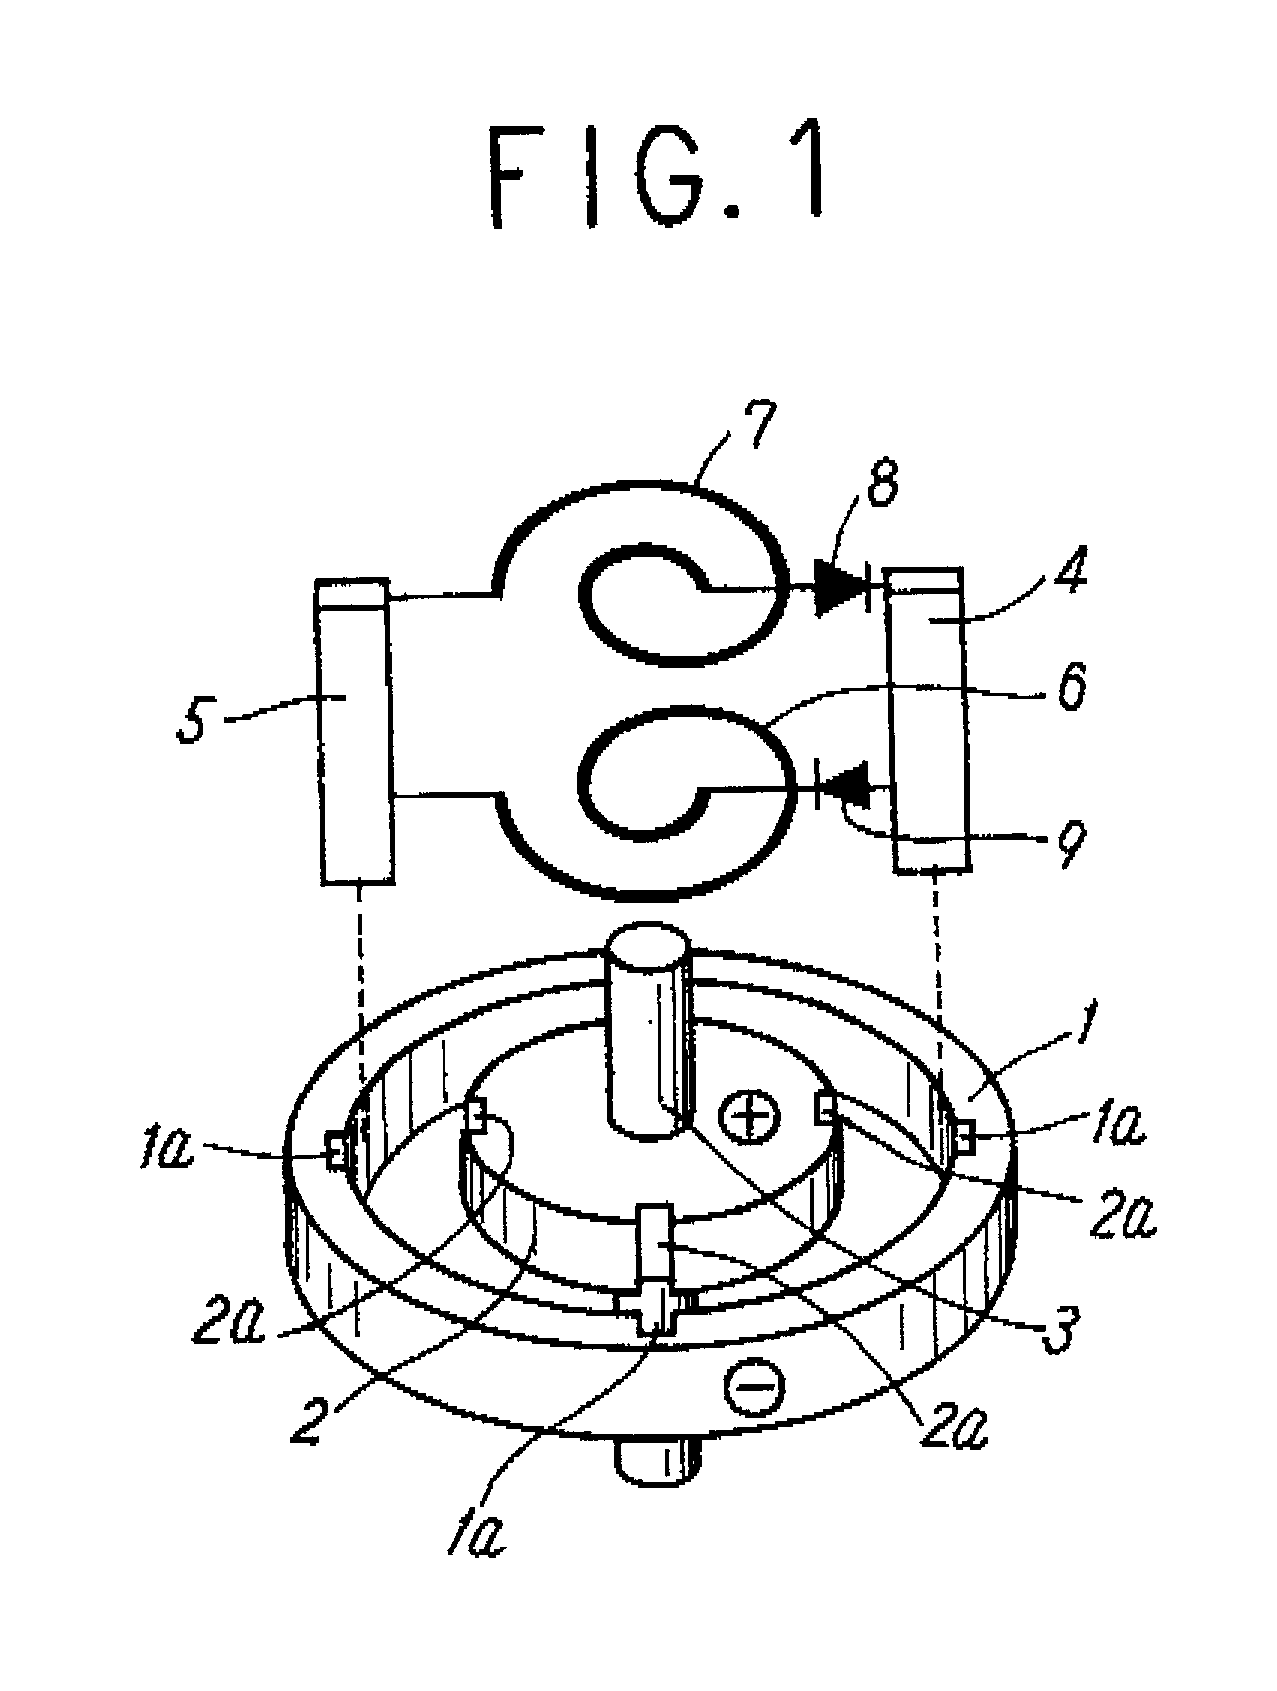 Continuous rotary actuator using shape memory alloy